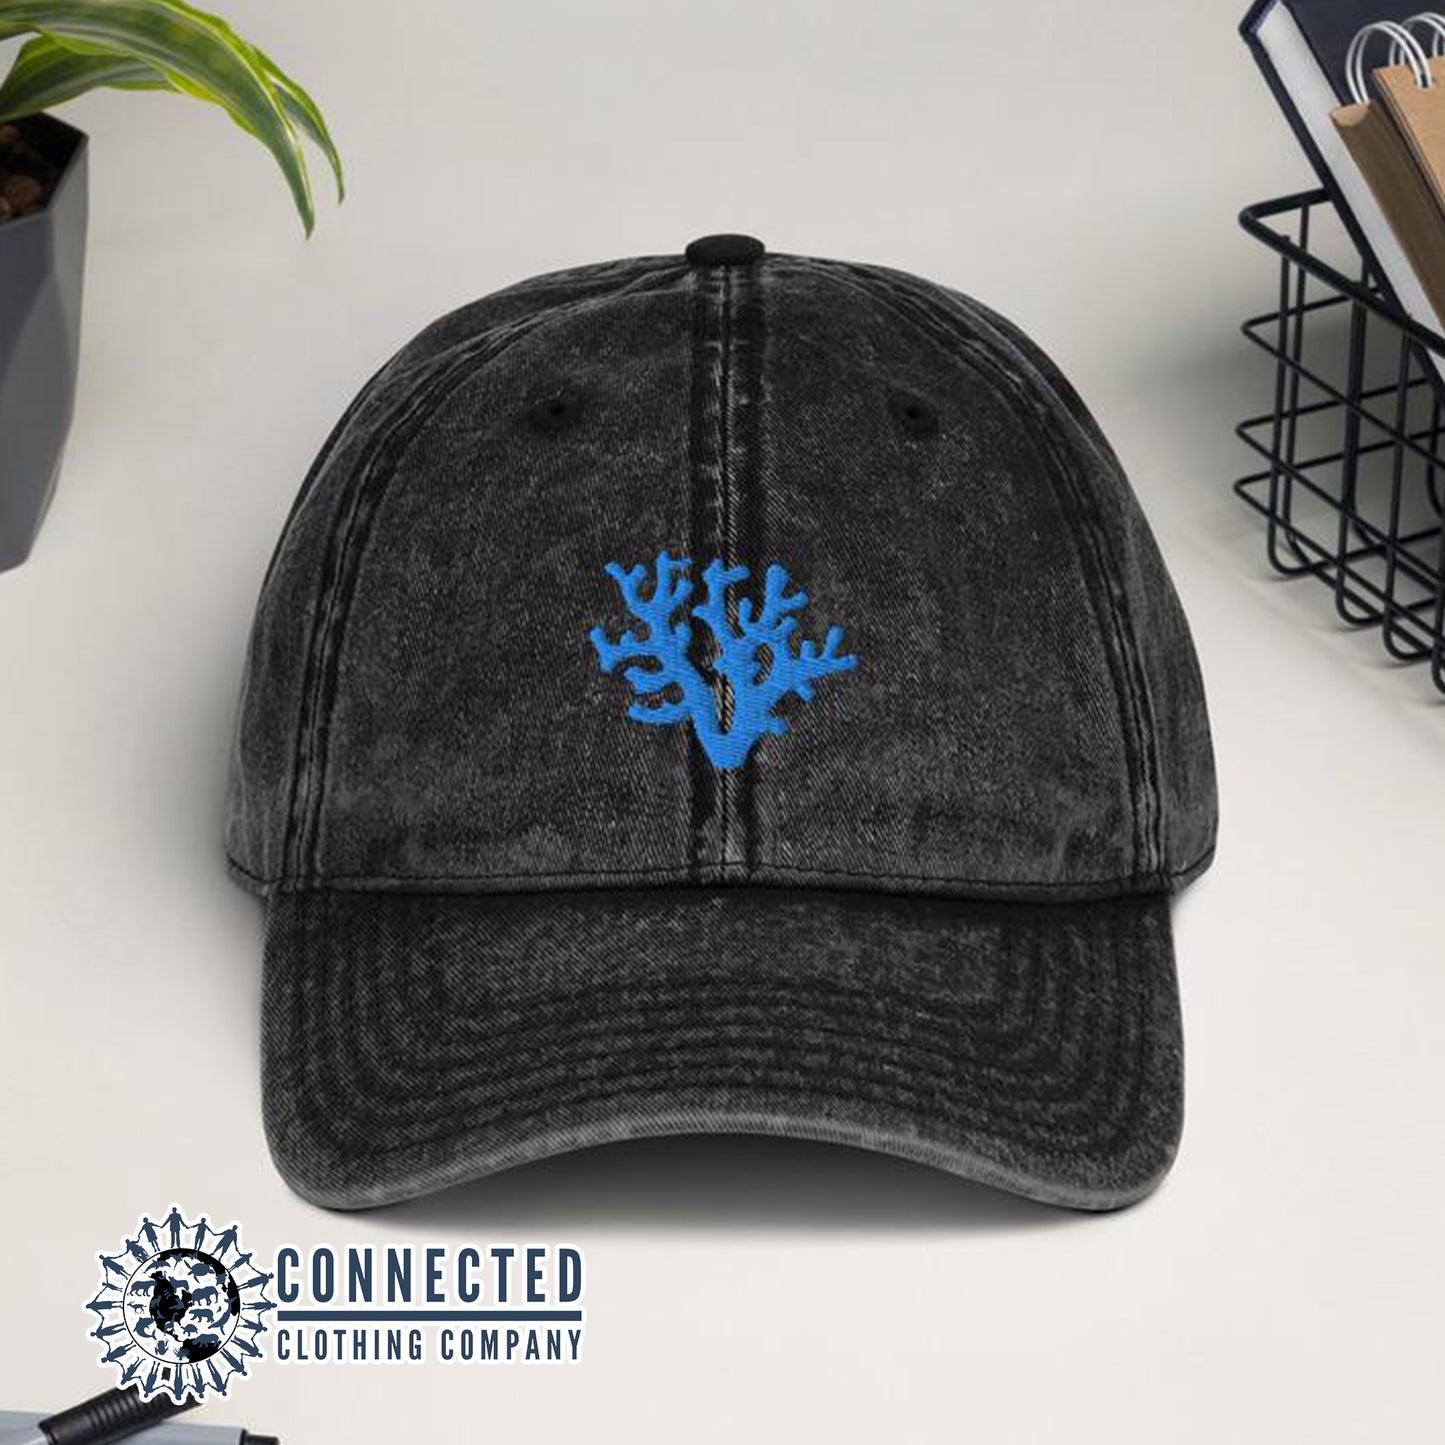 Black Coral Vintage Cotton Cap - sweetsherriloudesigns - Ethically and Sustainably Made - 10% donated to Mission Blue ocean conservation